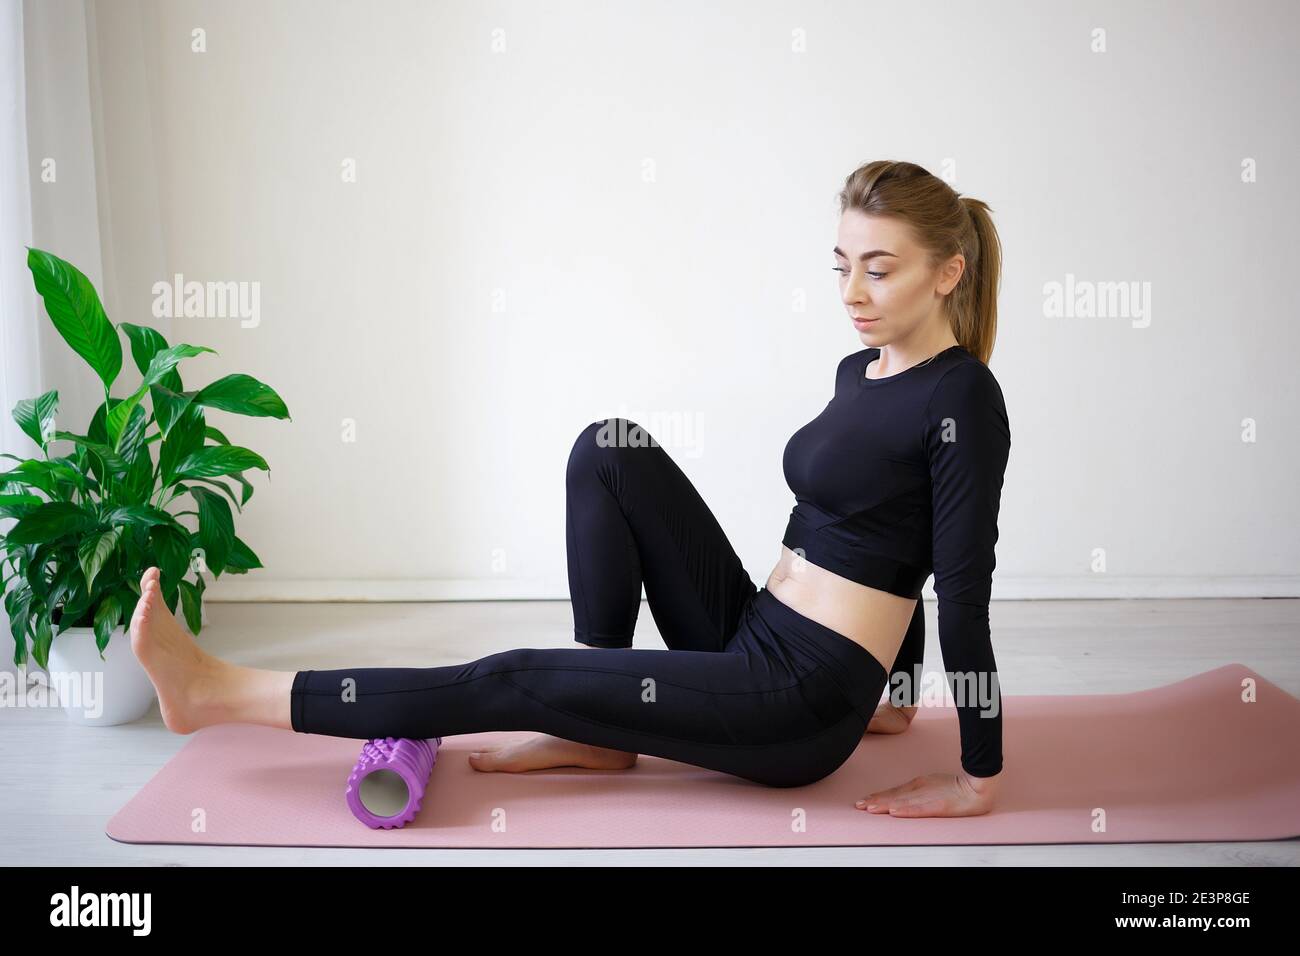 https://c8.alamy.com/comp/2E3P8GE/young-woman-doing-exercises-on-a-massage-roller-2E3P8GE.jpg